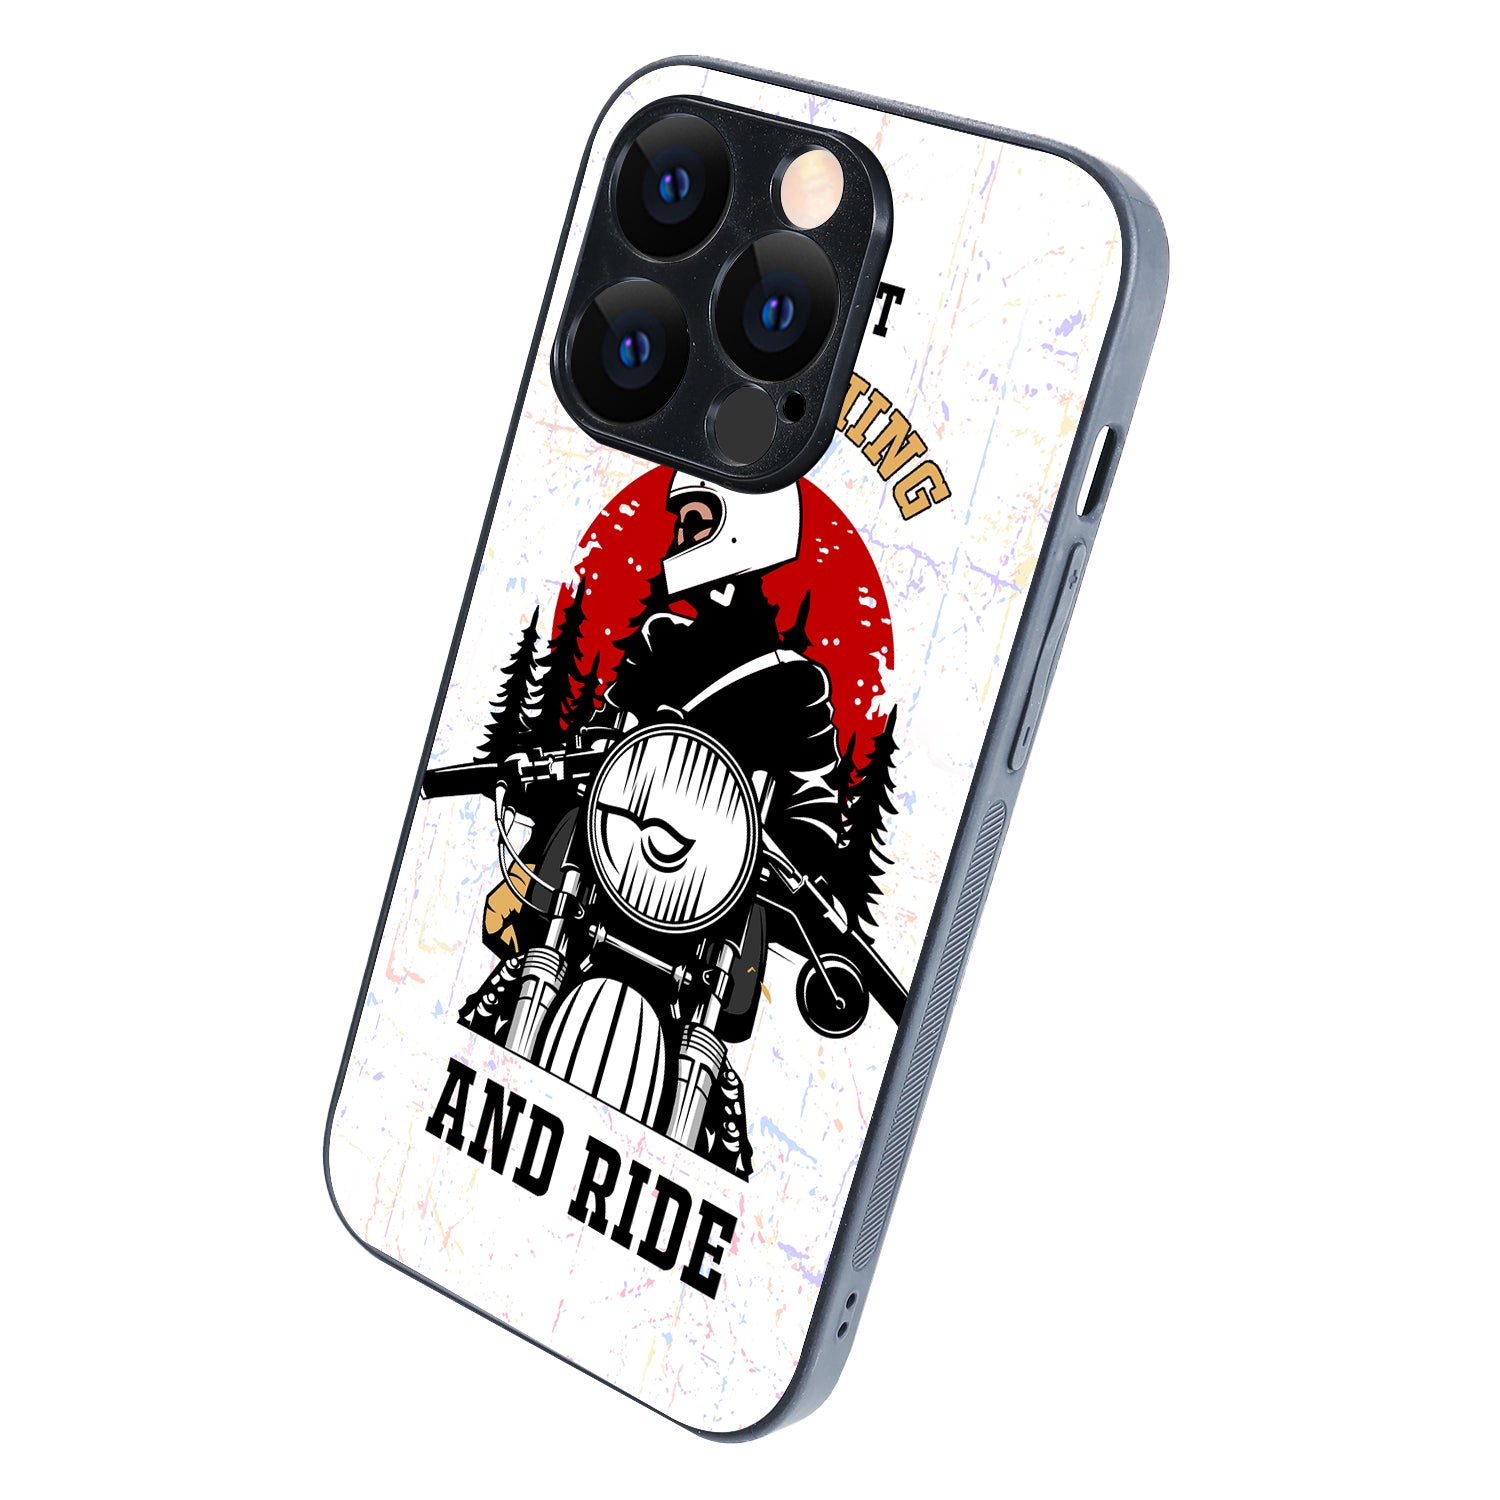 Forget Everything &amp; Ride Bike iPhone 14 Pro Case